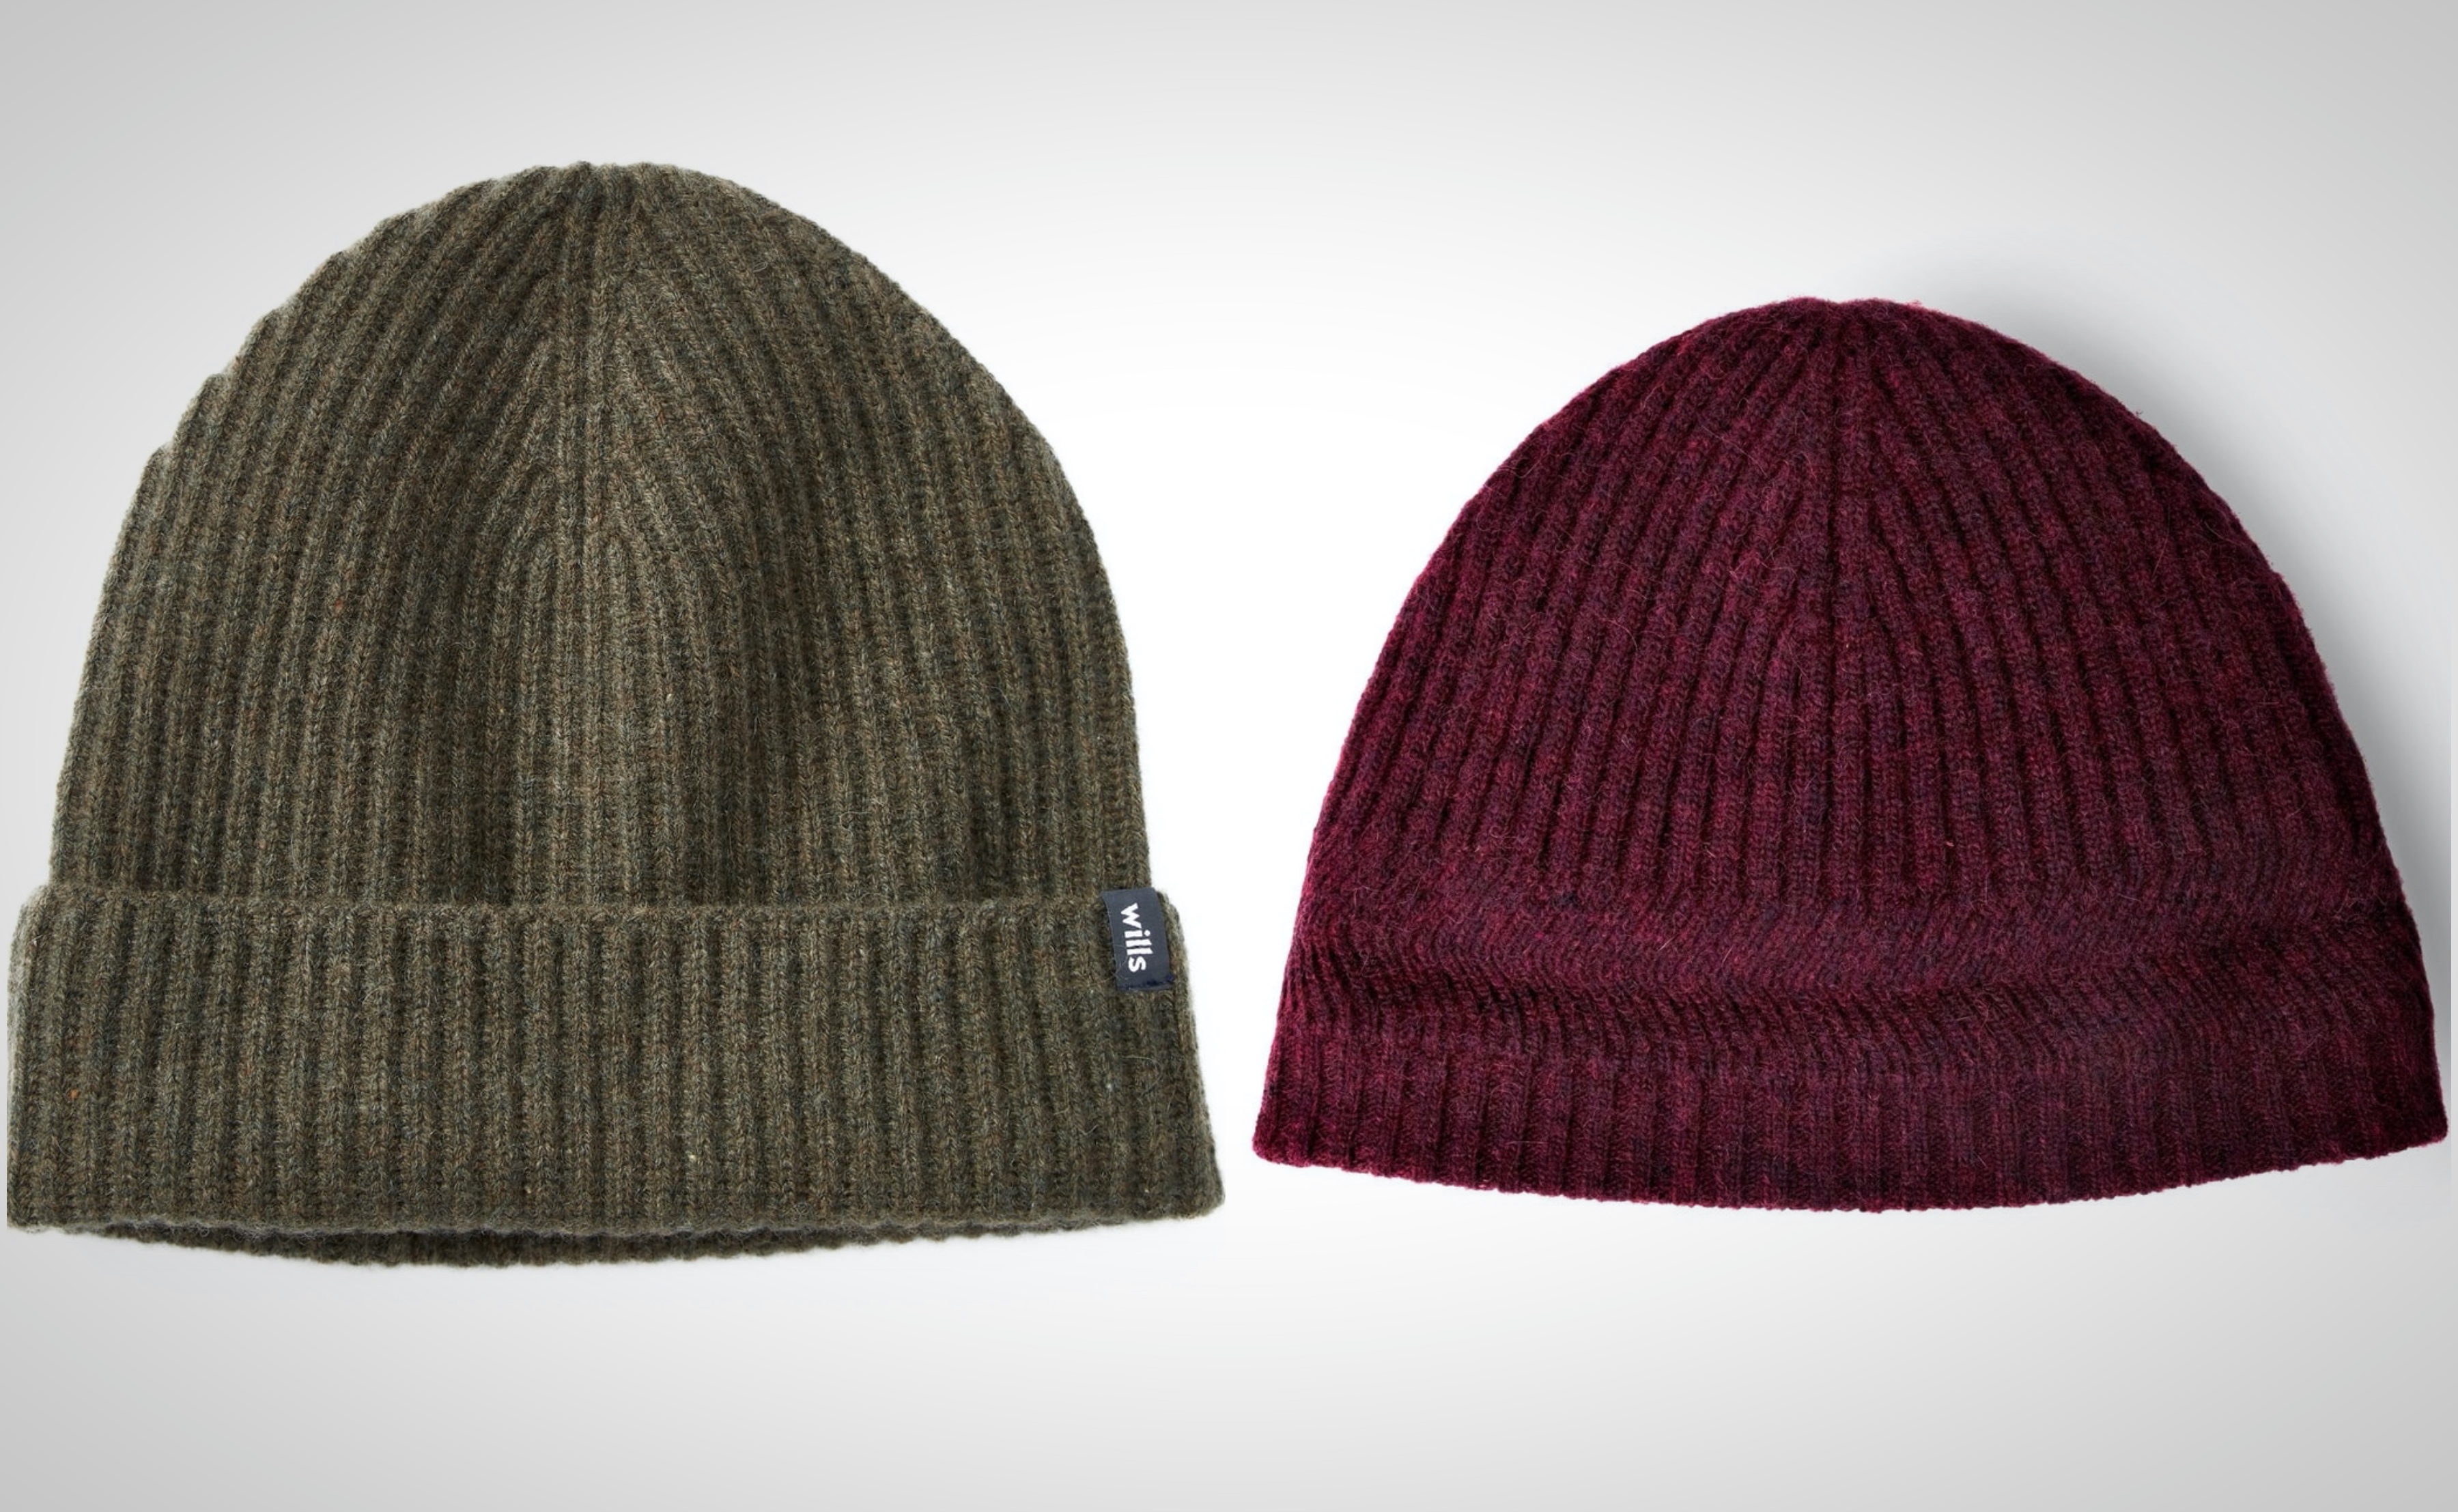 6 Comfy Beanies Santa Claus Should Put In Your Stocking This Year To ...